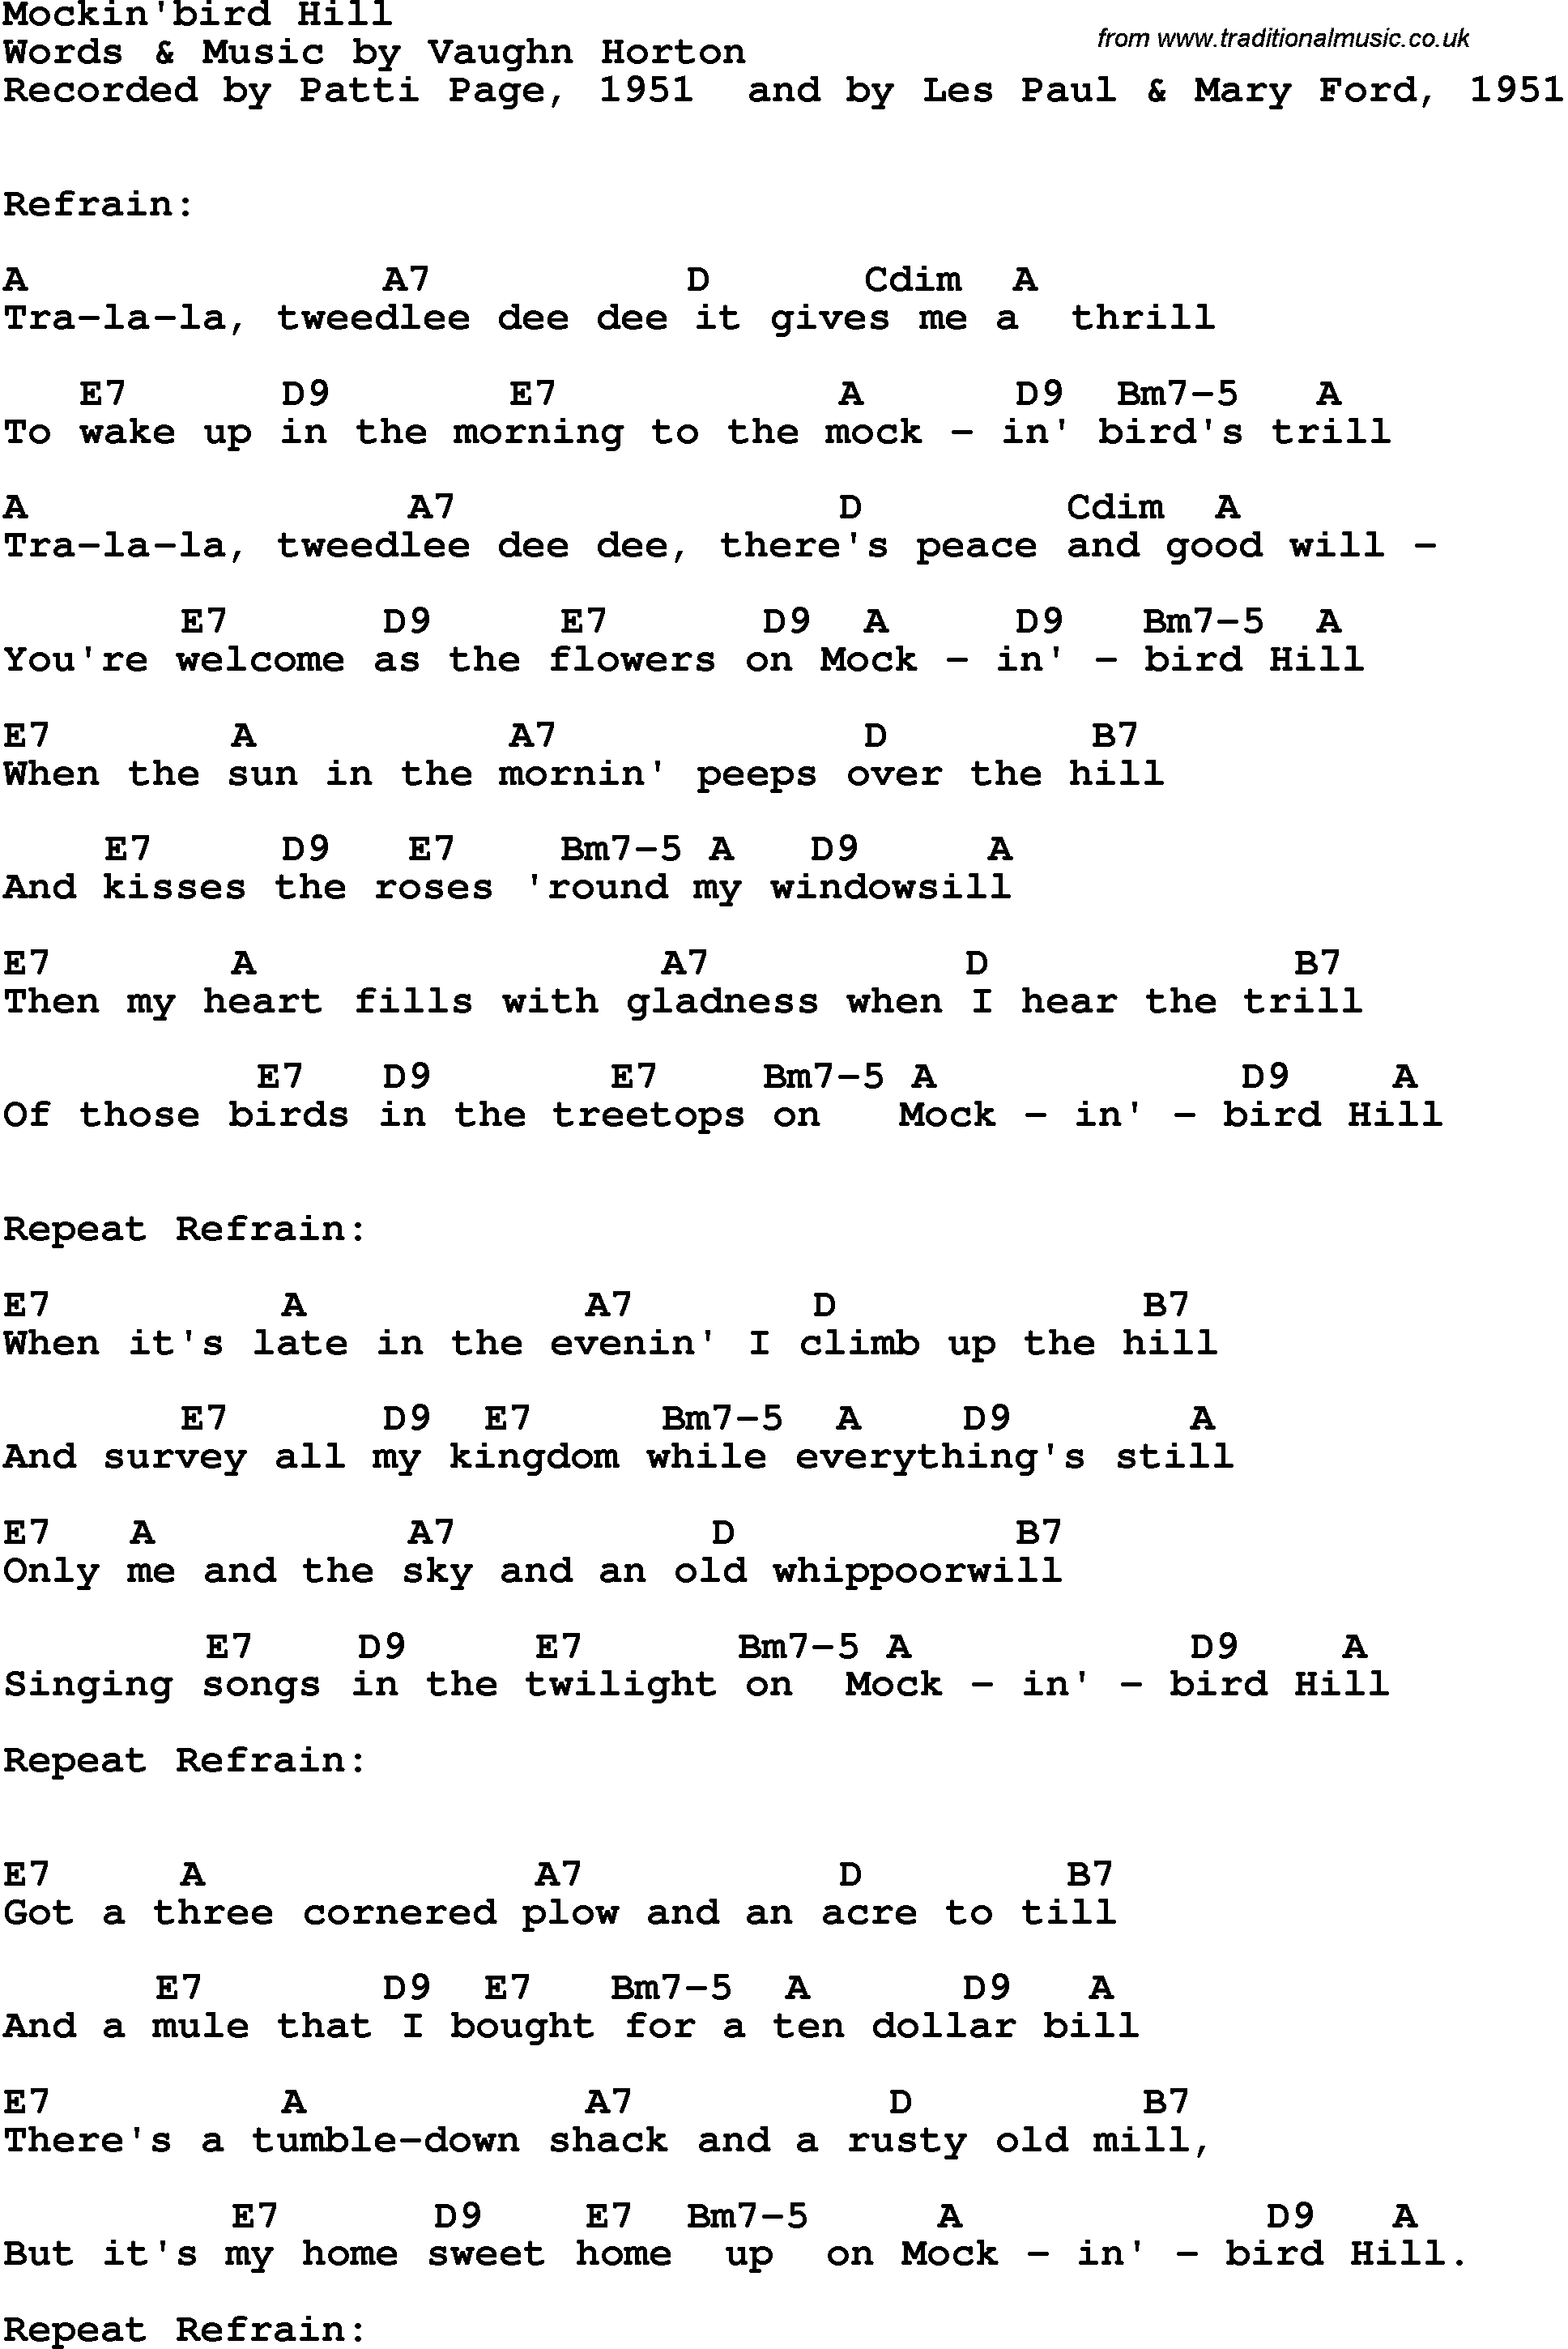 Song Lyrics with guitar chords for Mockin'bird Hill - Patti Page, 1951